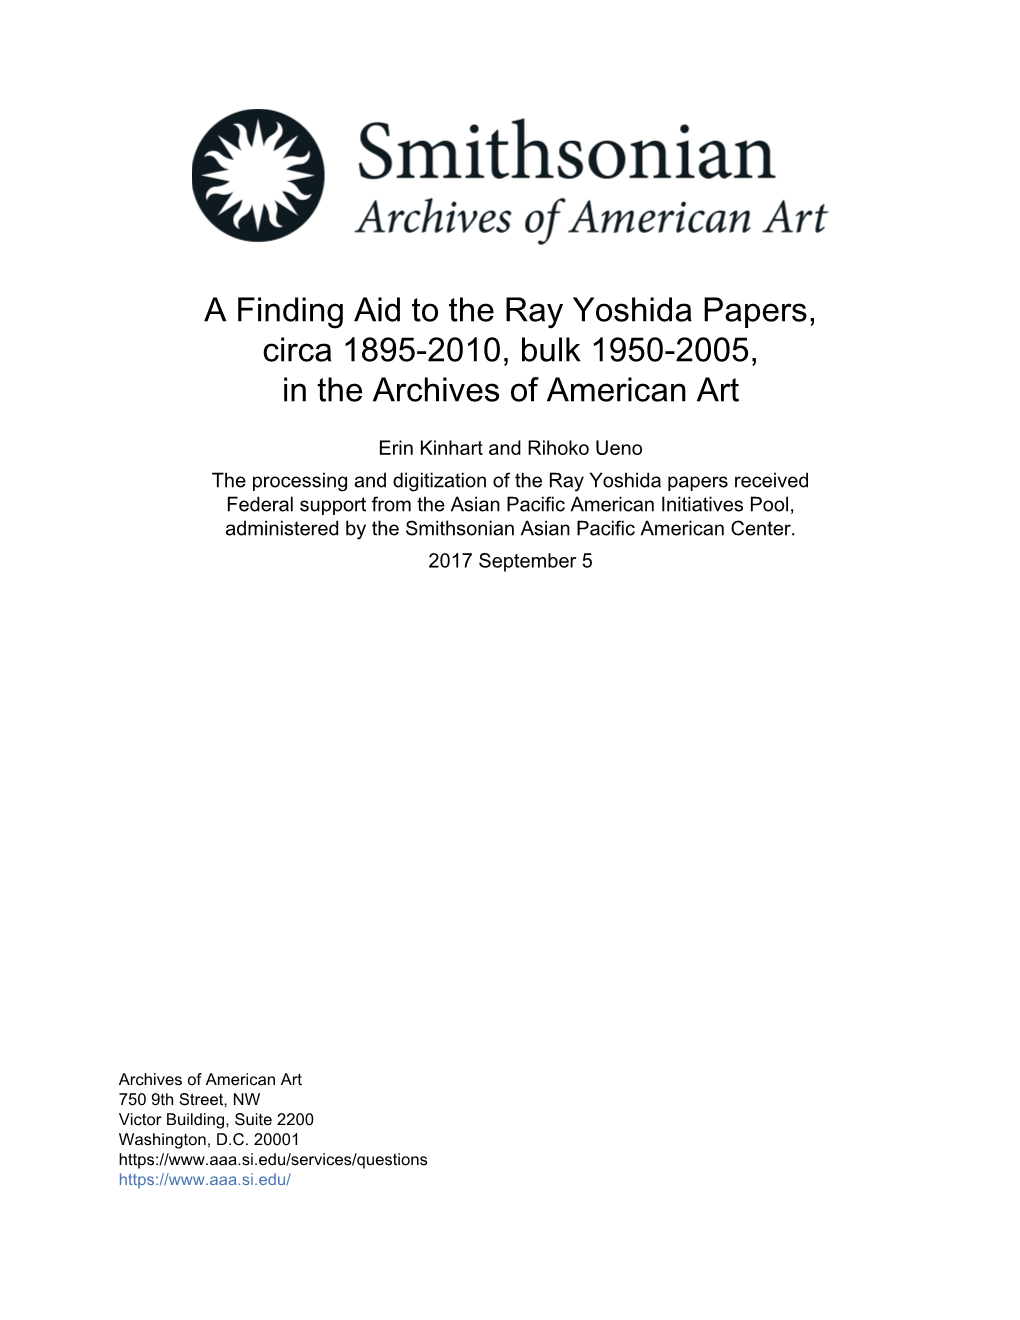 A Finding Aid to the Ray Yoshida Papers, Circa 1895-2010, Bulk 1950-2005, in the Archives of American Art